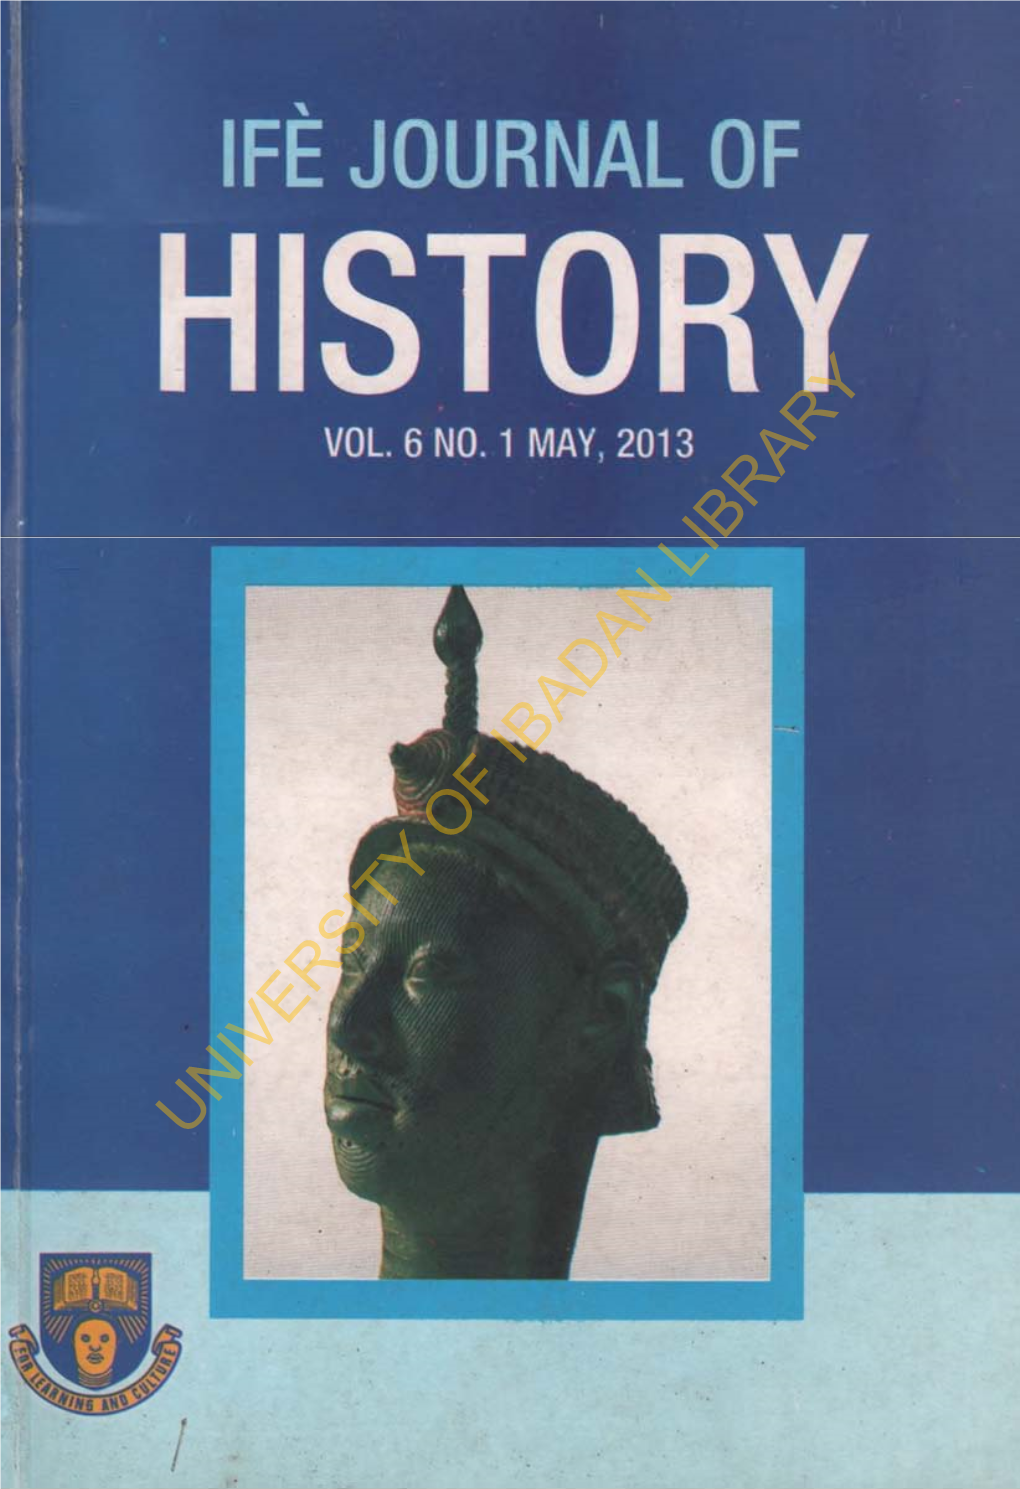 Ife Journal of History Vol 6 No